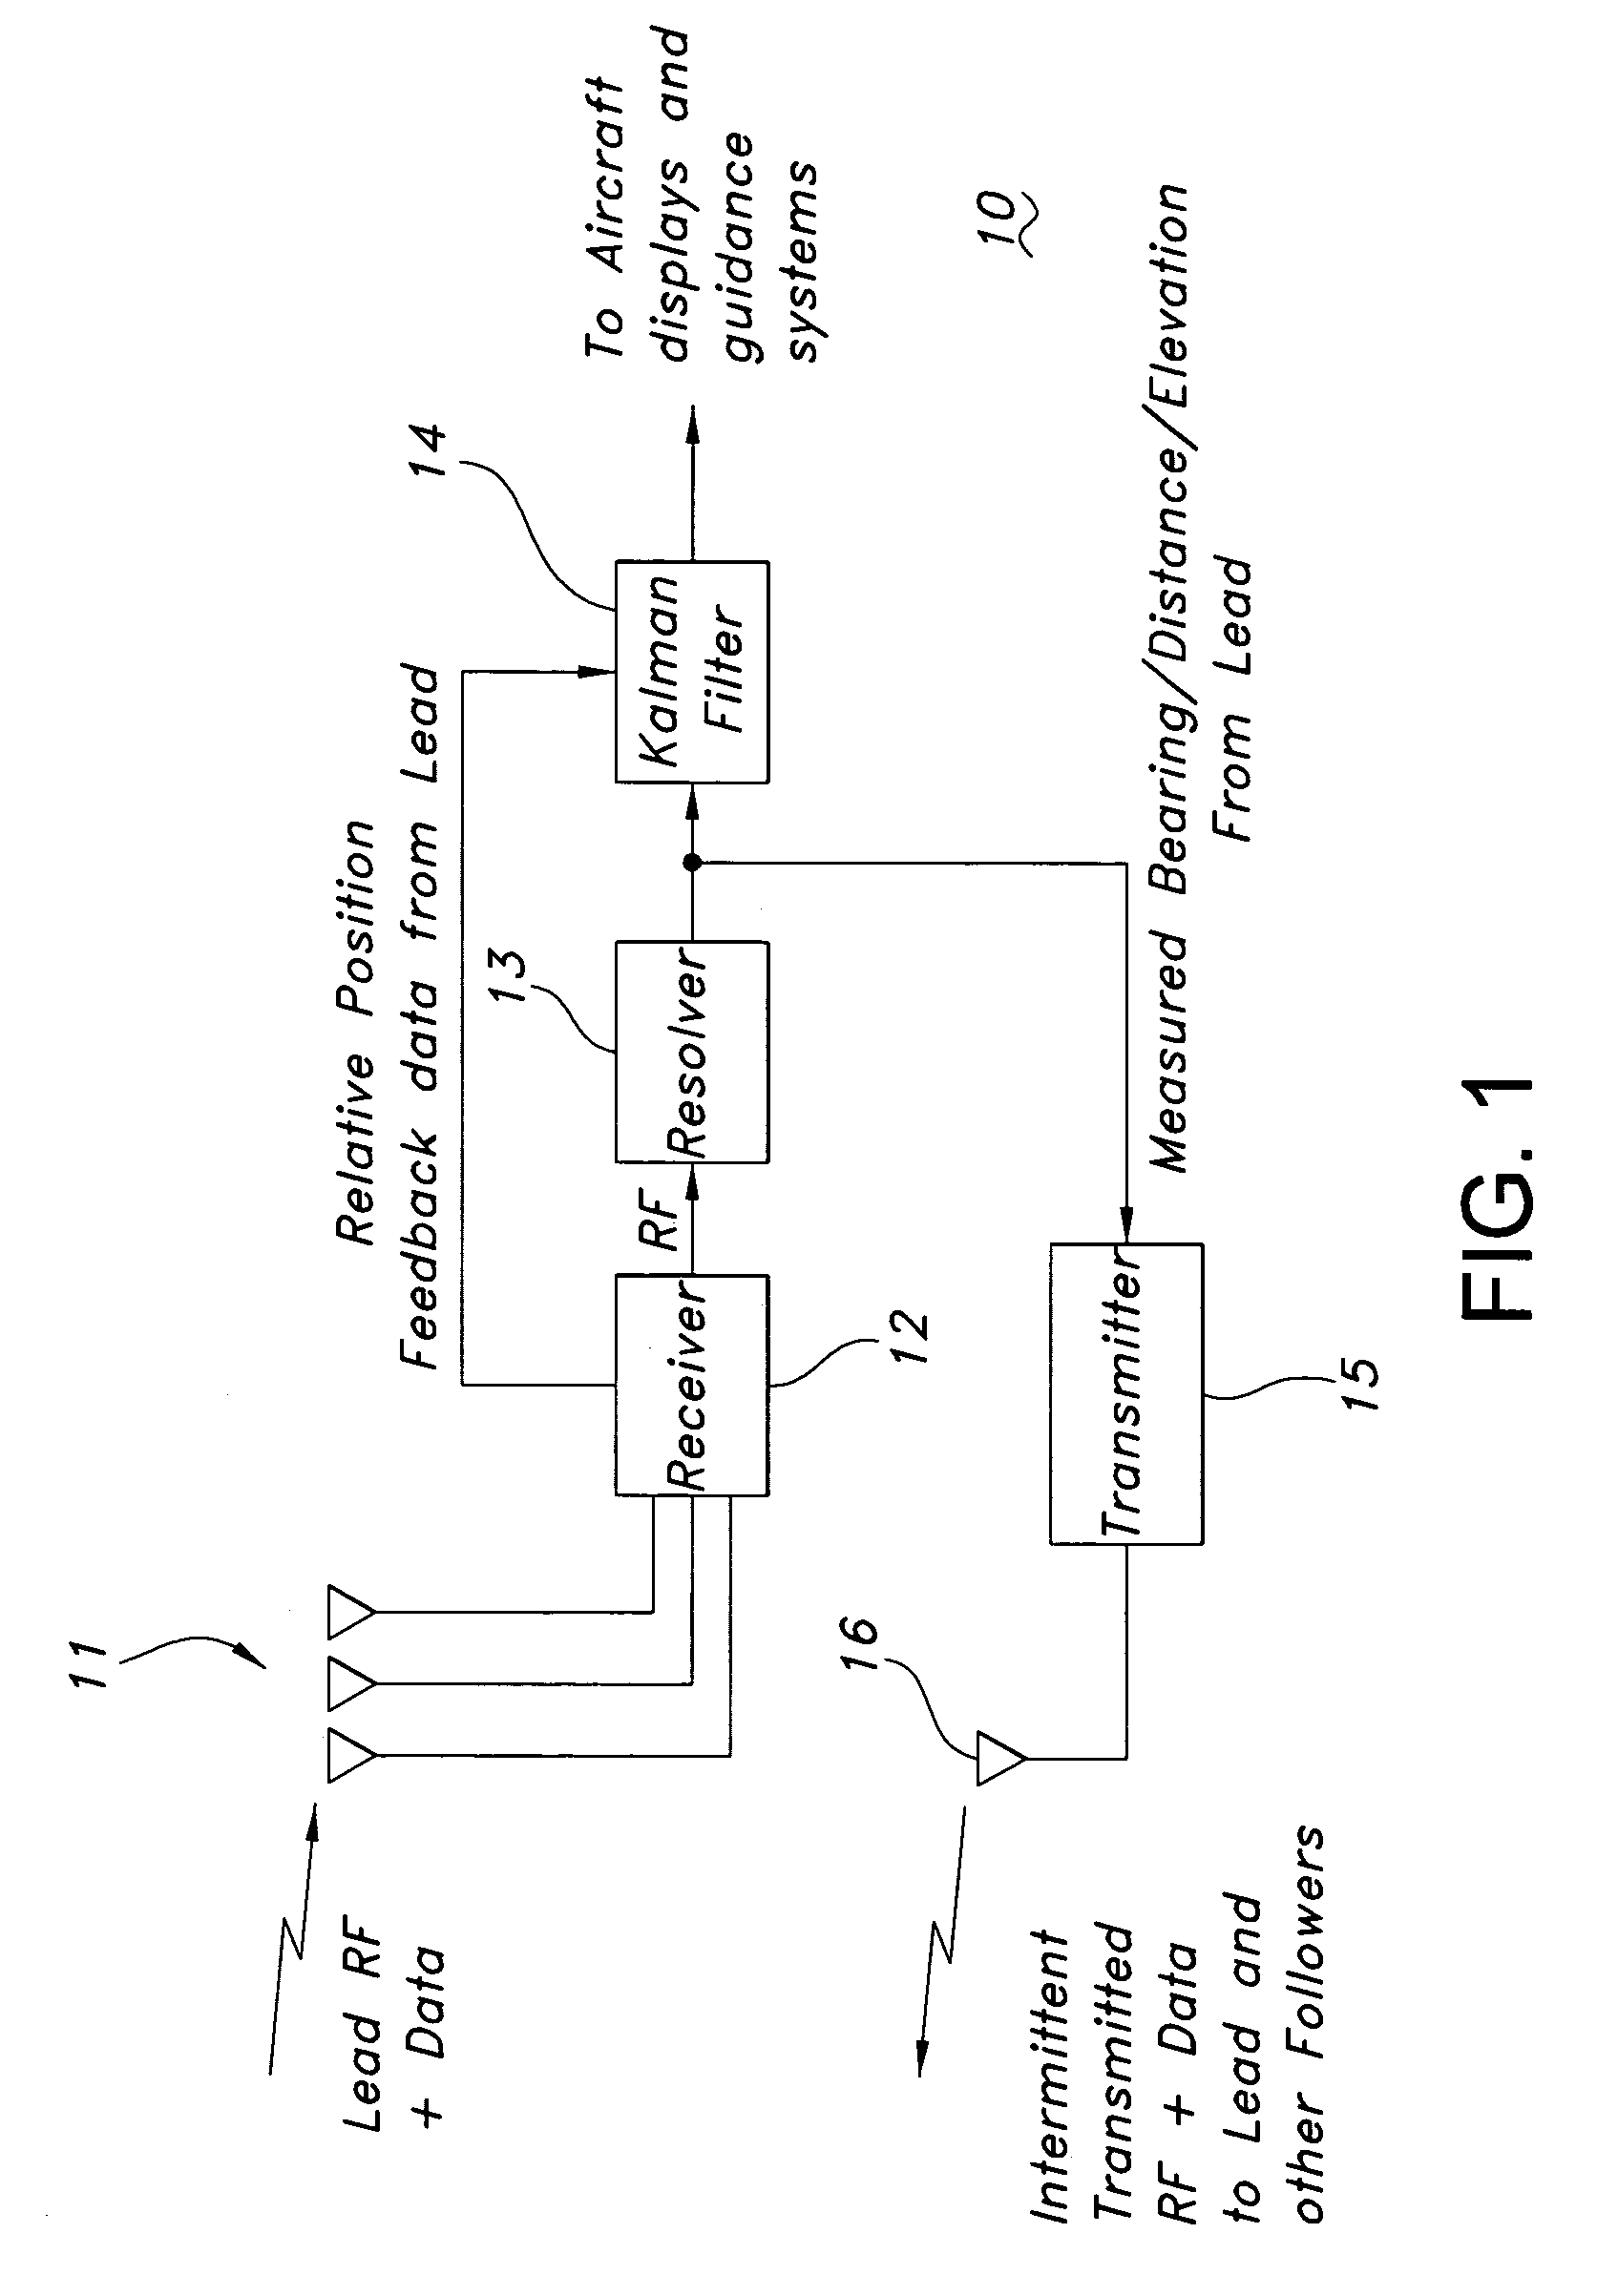 System and method for improving aircraft formation flying accuracy and integrity